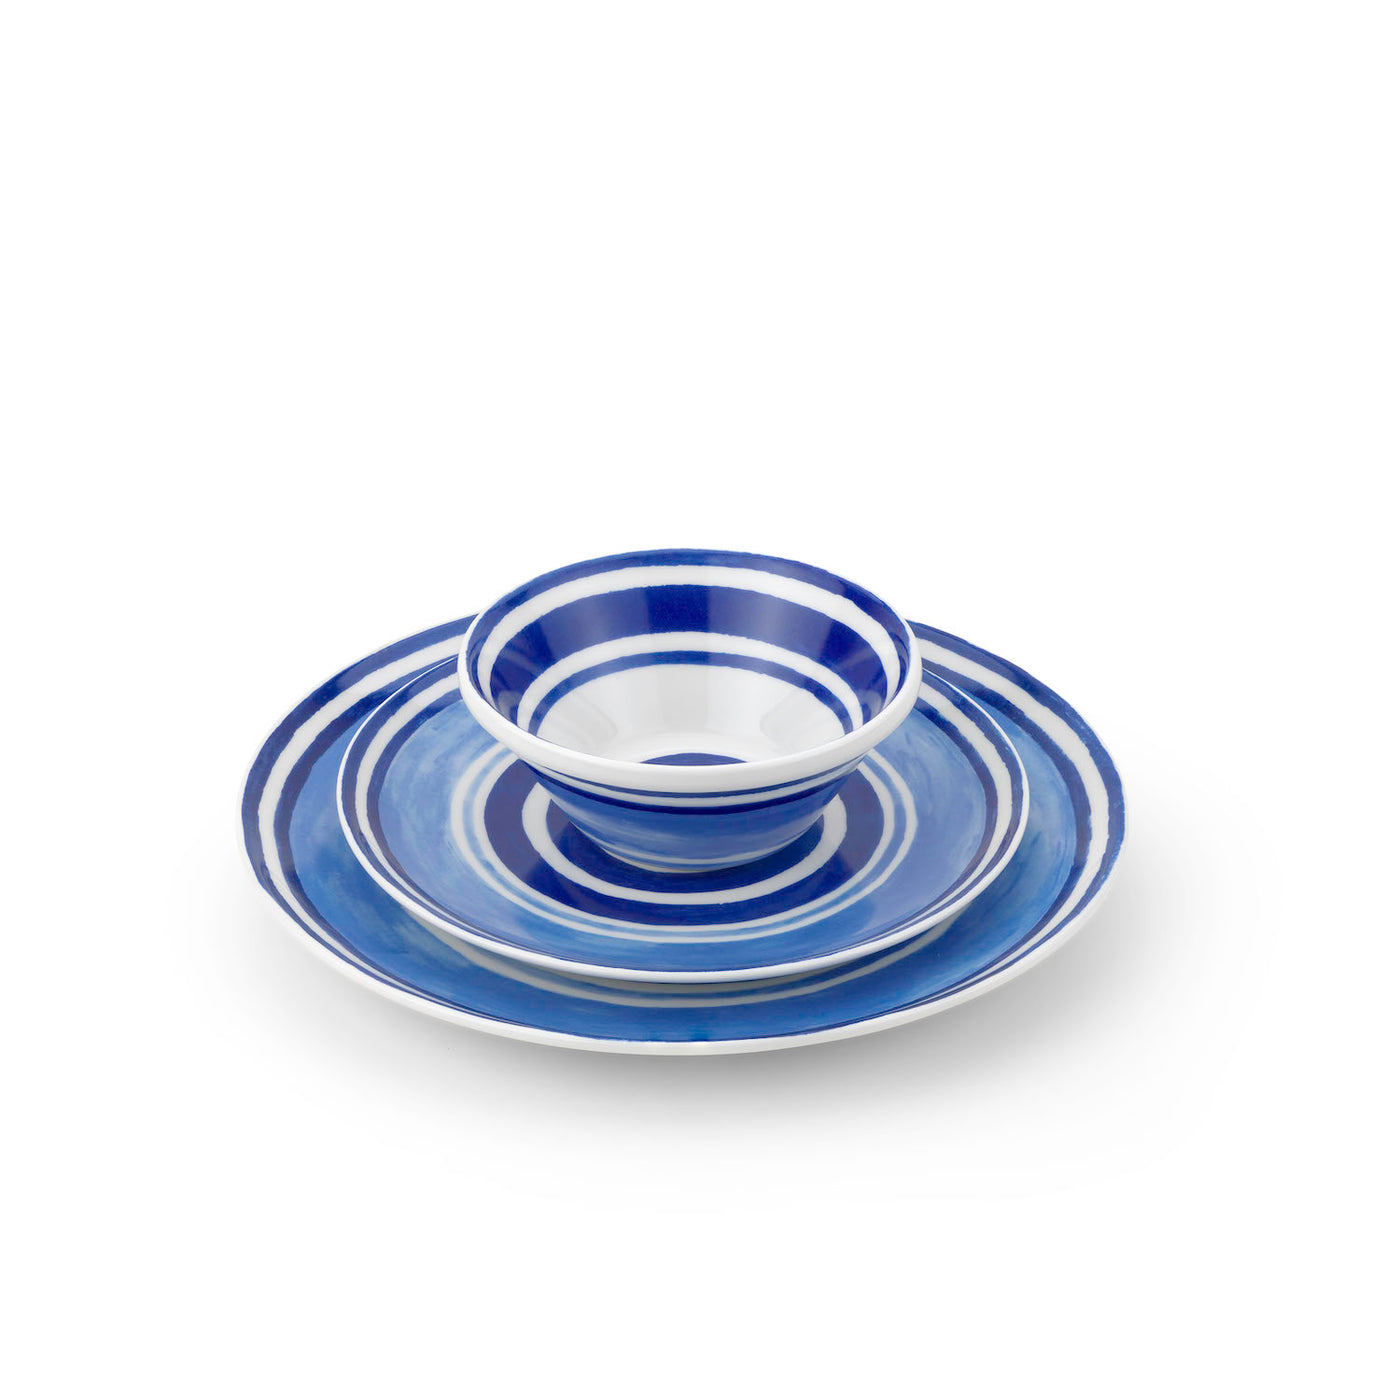 Maze Cereal Bowl in Blue